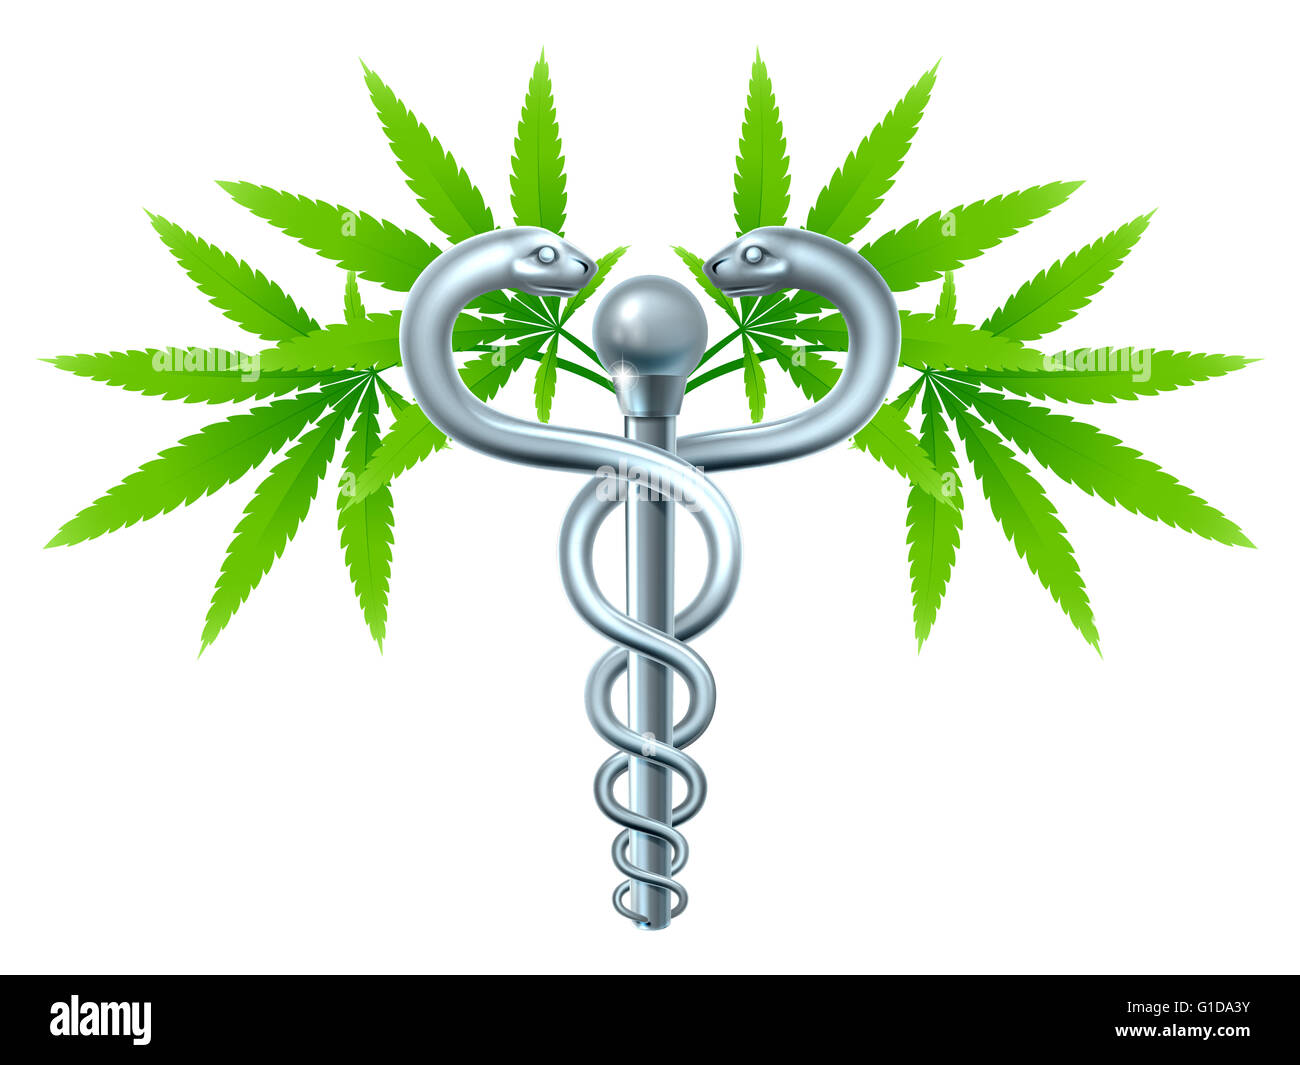 A medical marijuana plant caduceus concept symbol with cannabis plant with leaves intertwined around a rod Stock Photo